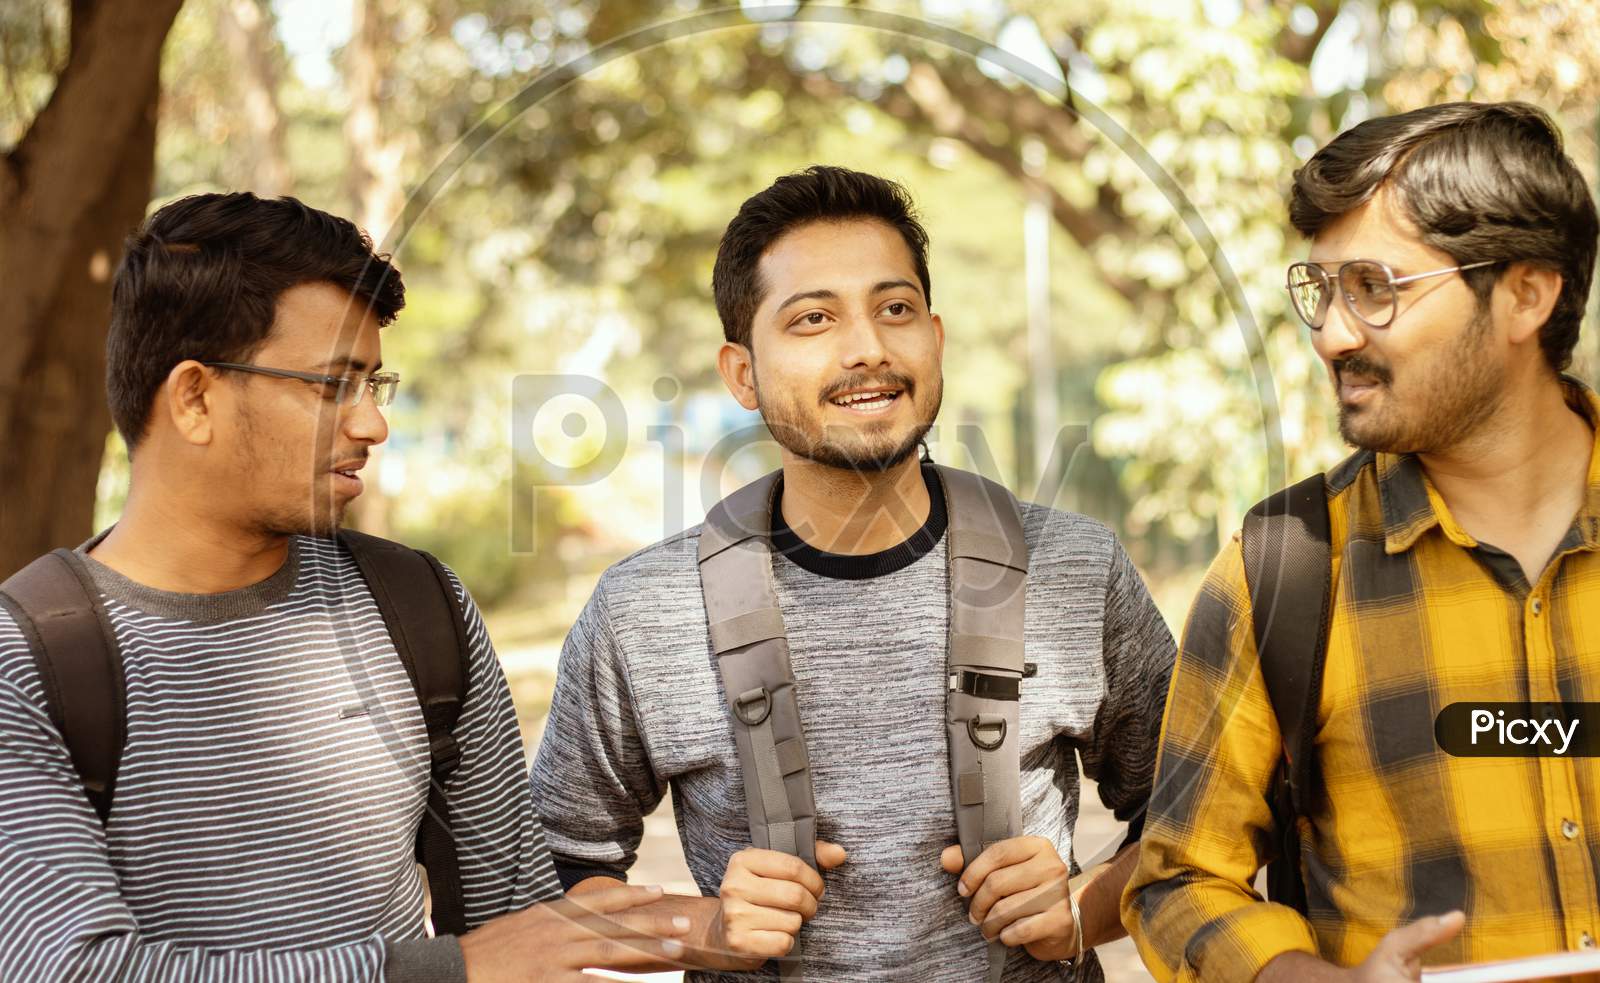 Three Students Talking Or Socializing At University Campus - Friends Having Fun And Conversation At College - Concept Of Happy Friendship, College Days And Student Life.